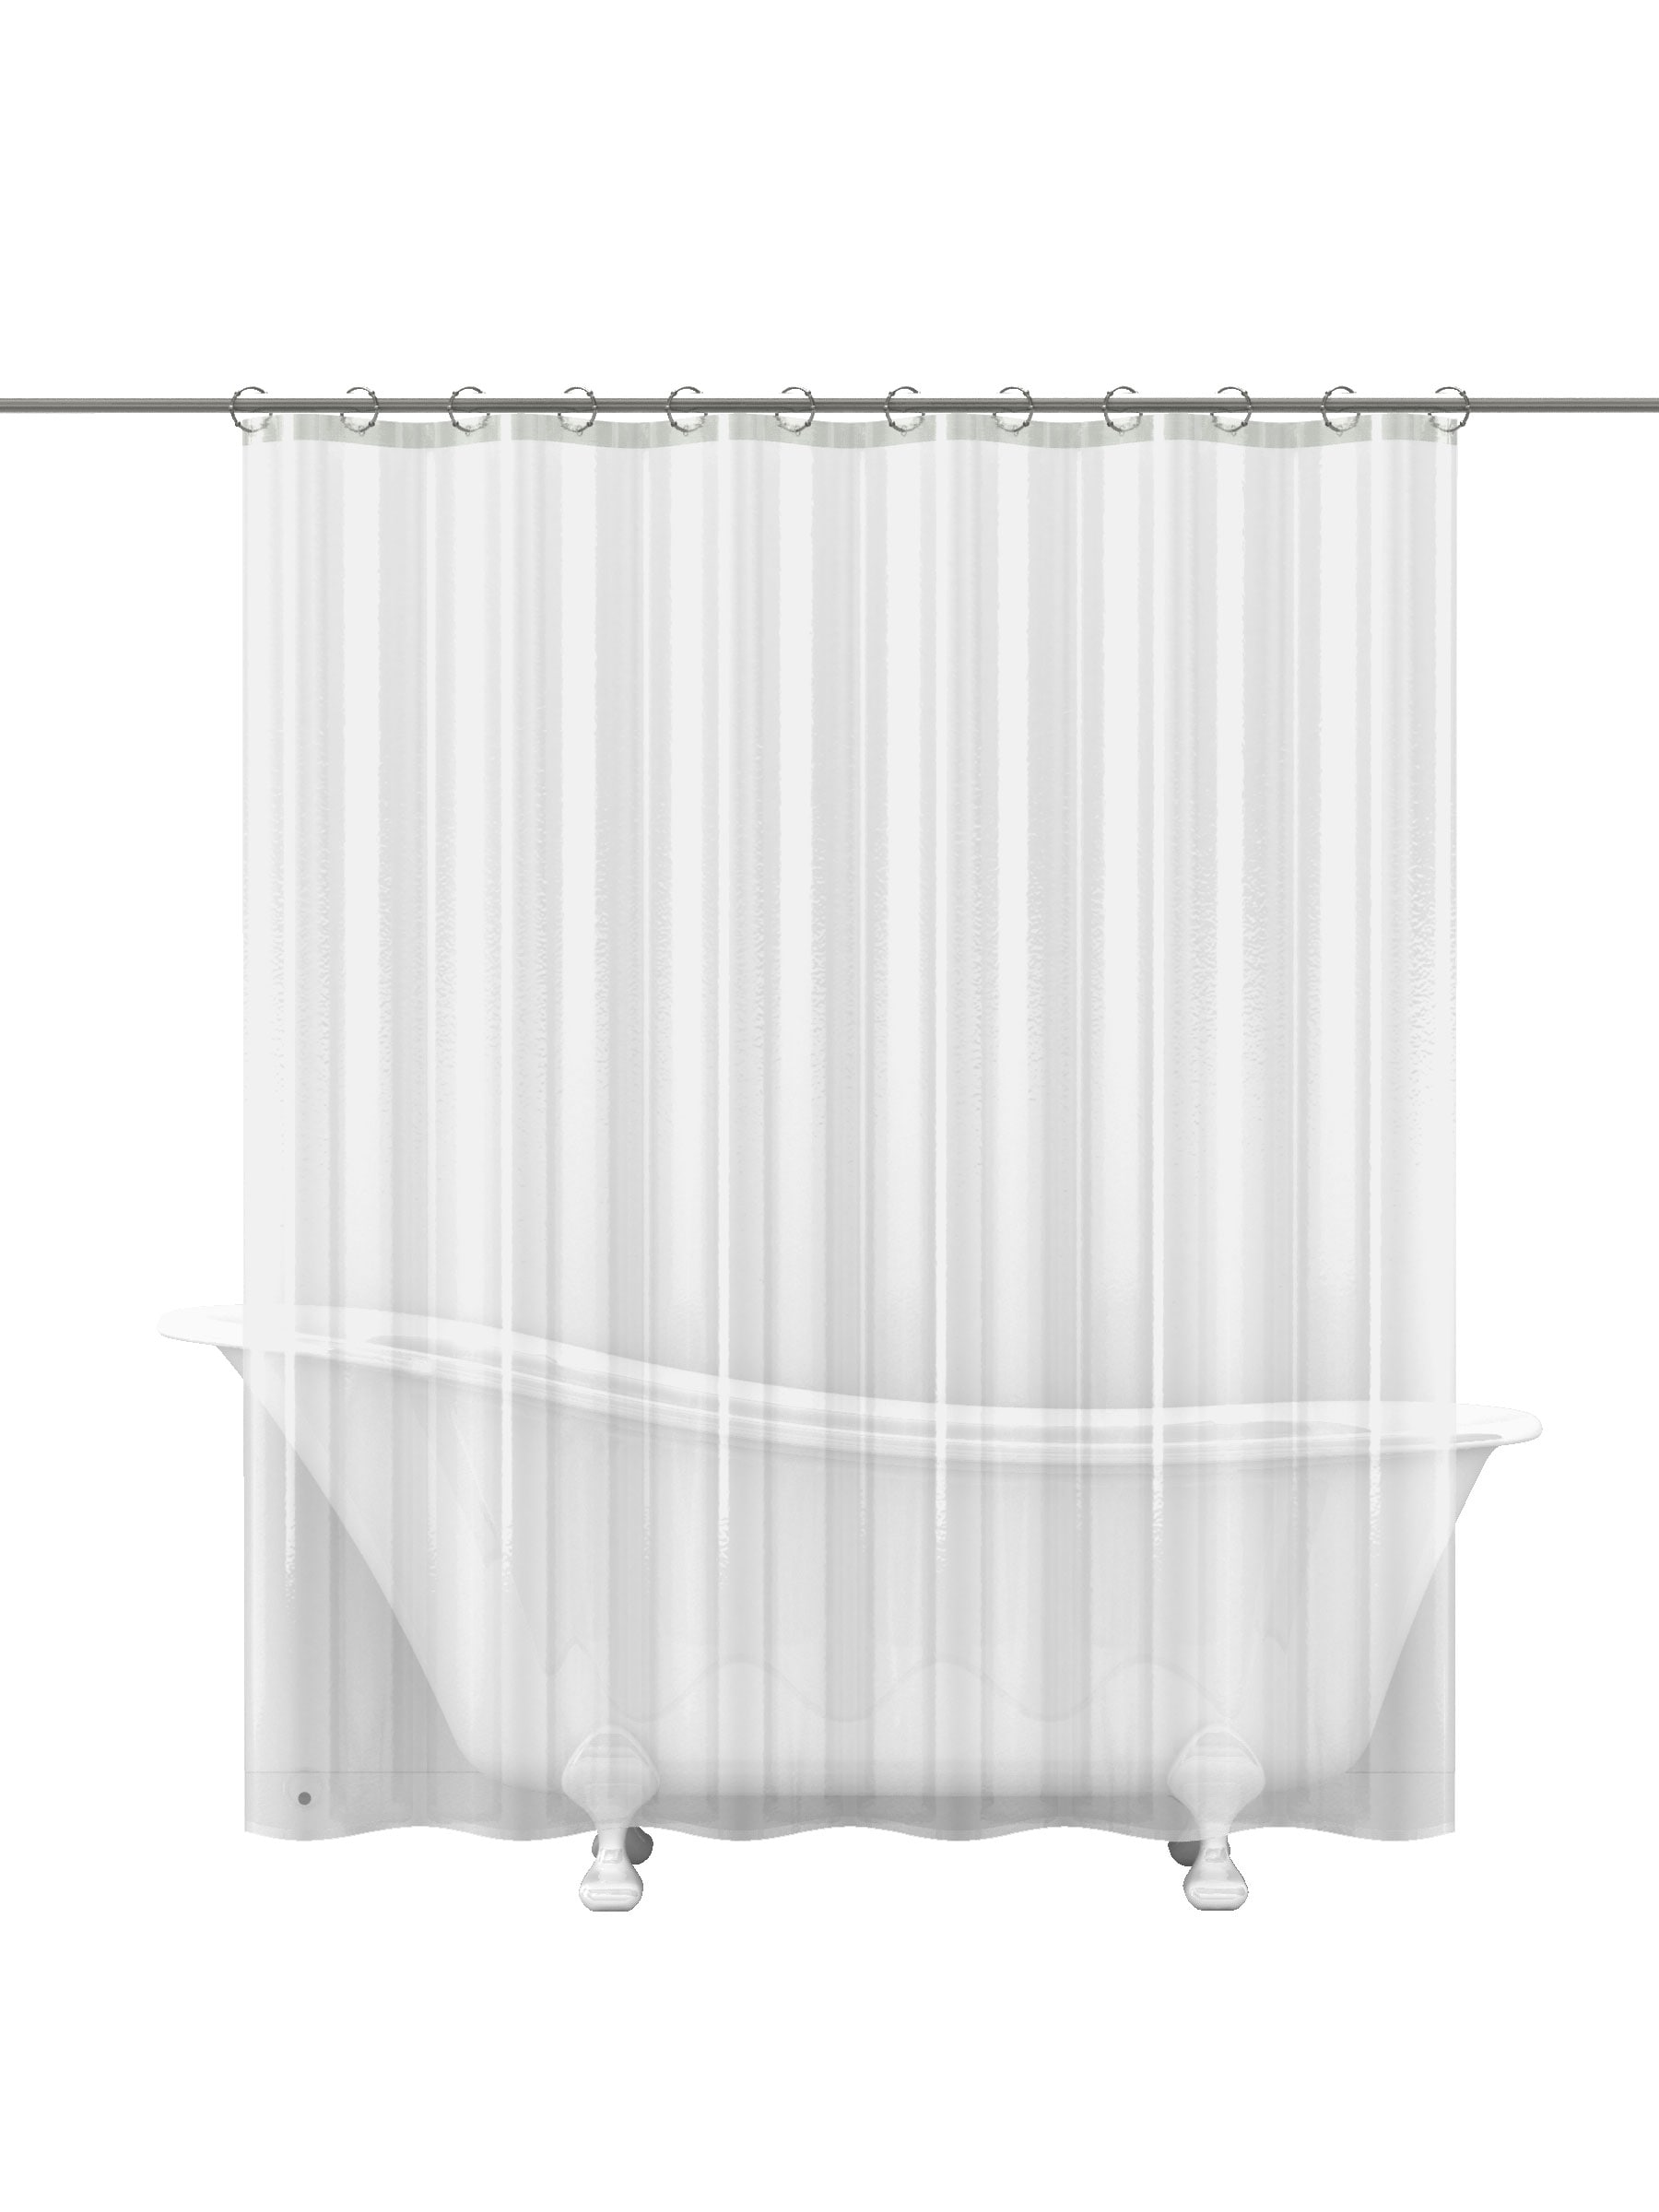 Eva Peva Clear Solid Shower Liner, Do All Shower Curtains Need Liners